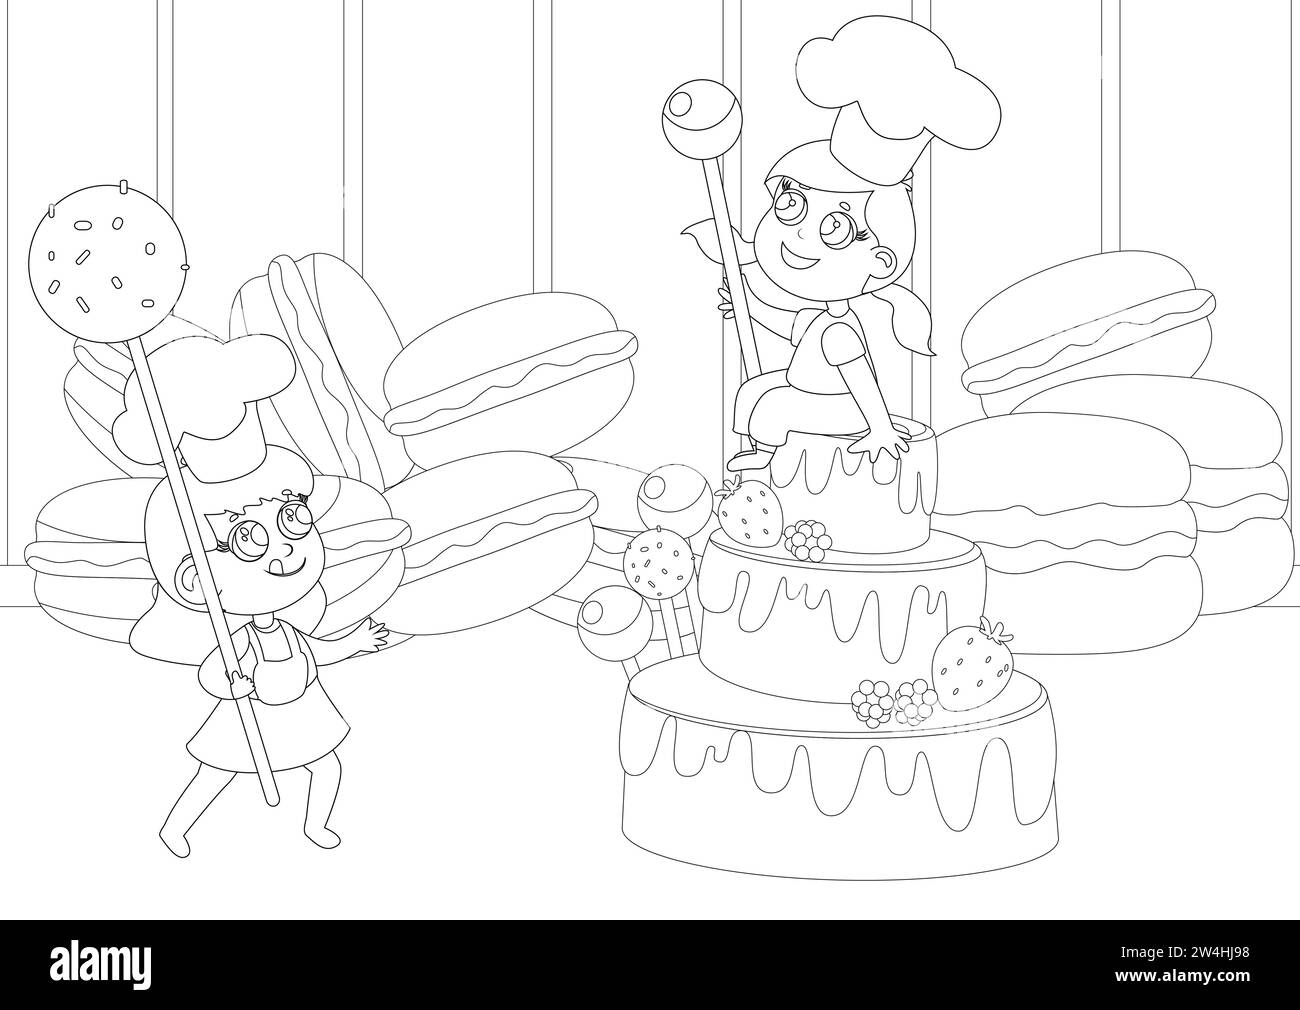 Coloring page. Children near huge cake sweets, macaroons and marshmallows, candy pop. Humorous illustration of children's love for sweets. Stock Vector